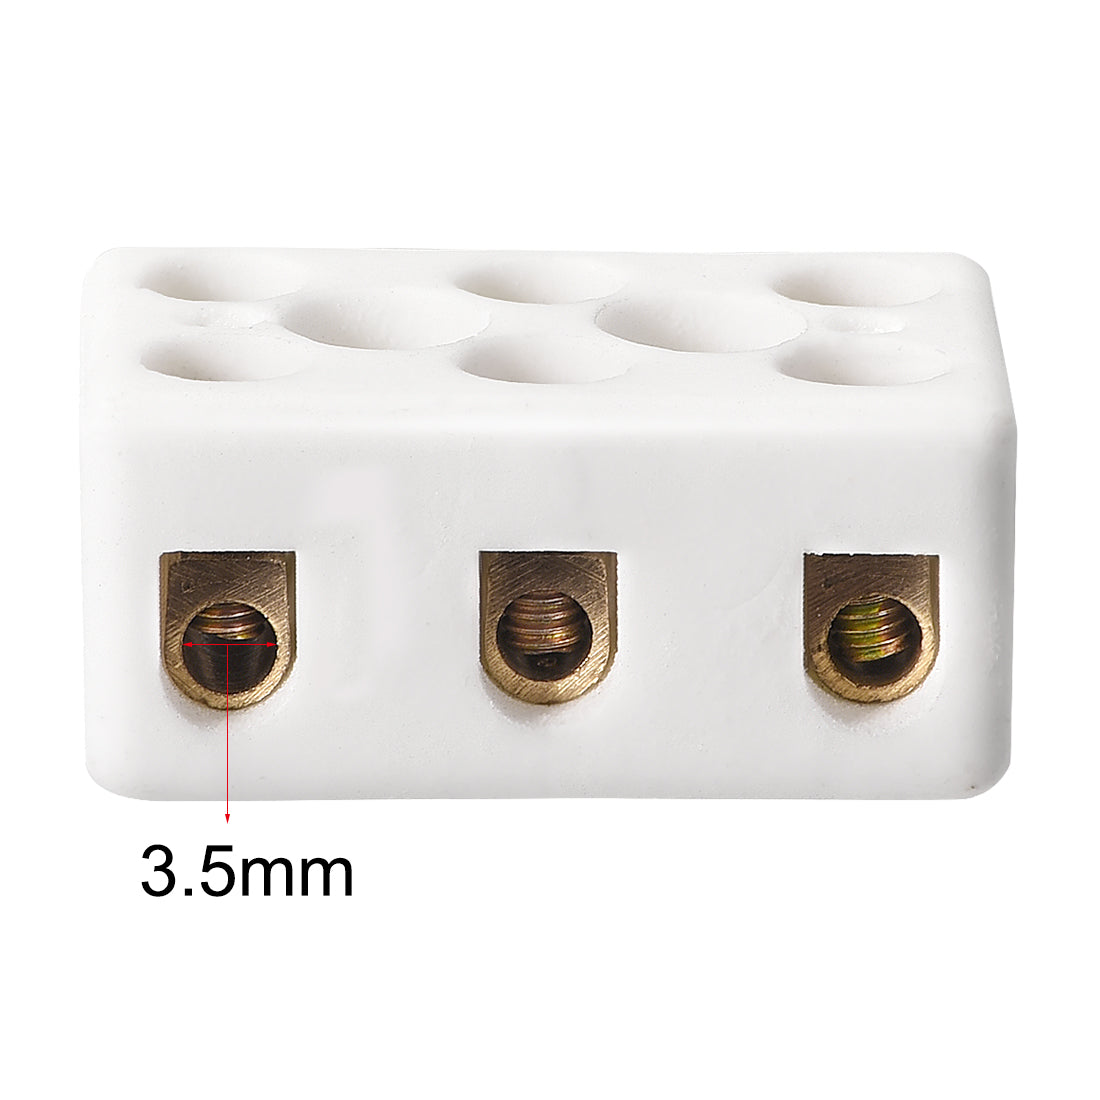 uxcell Uxcell 3 Way Ceramics Terminal Blocks High Temp Porcelain Ceramic Connectors 31x20x14mm for Electrical Wire Cable 2 Pcs